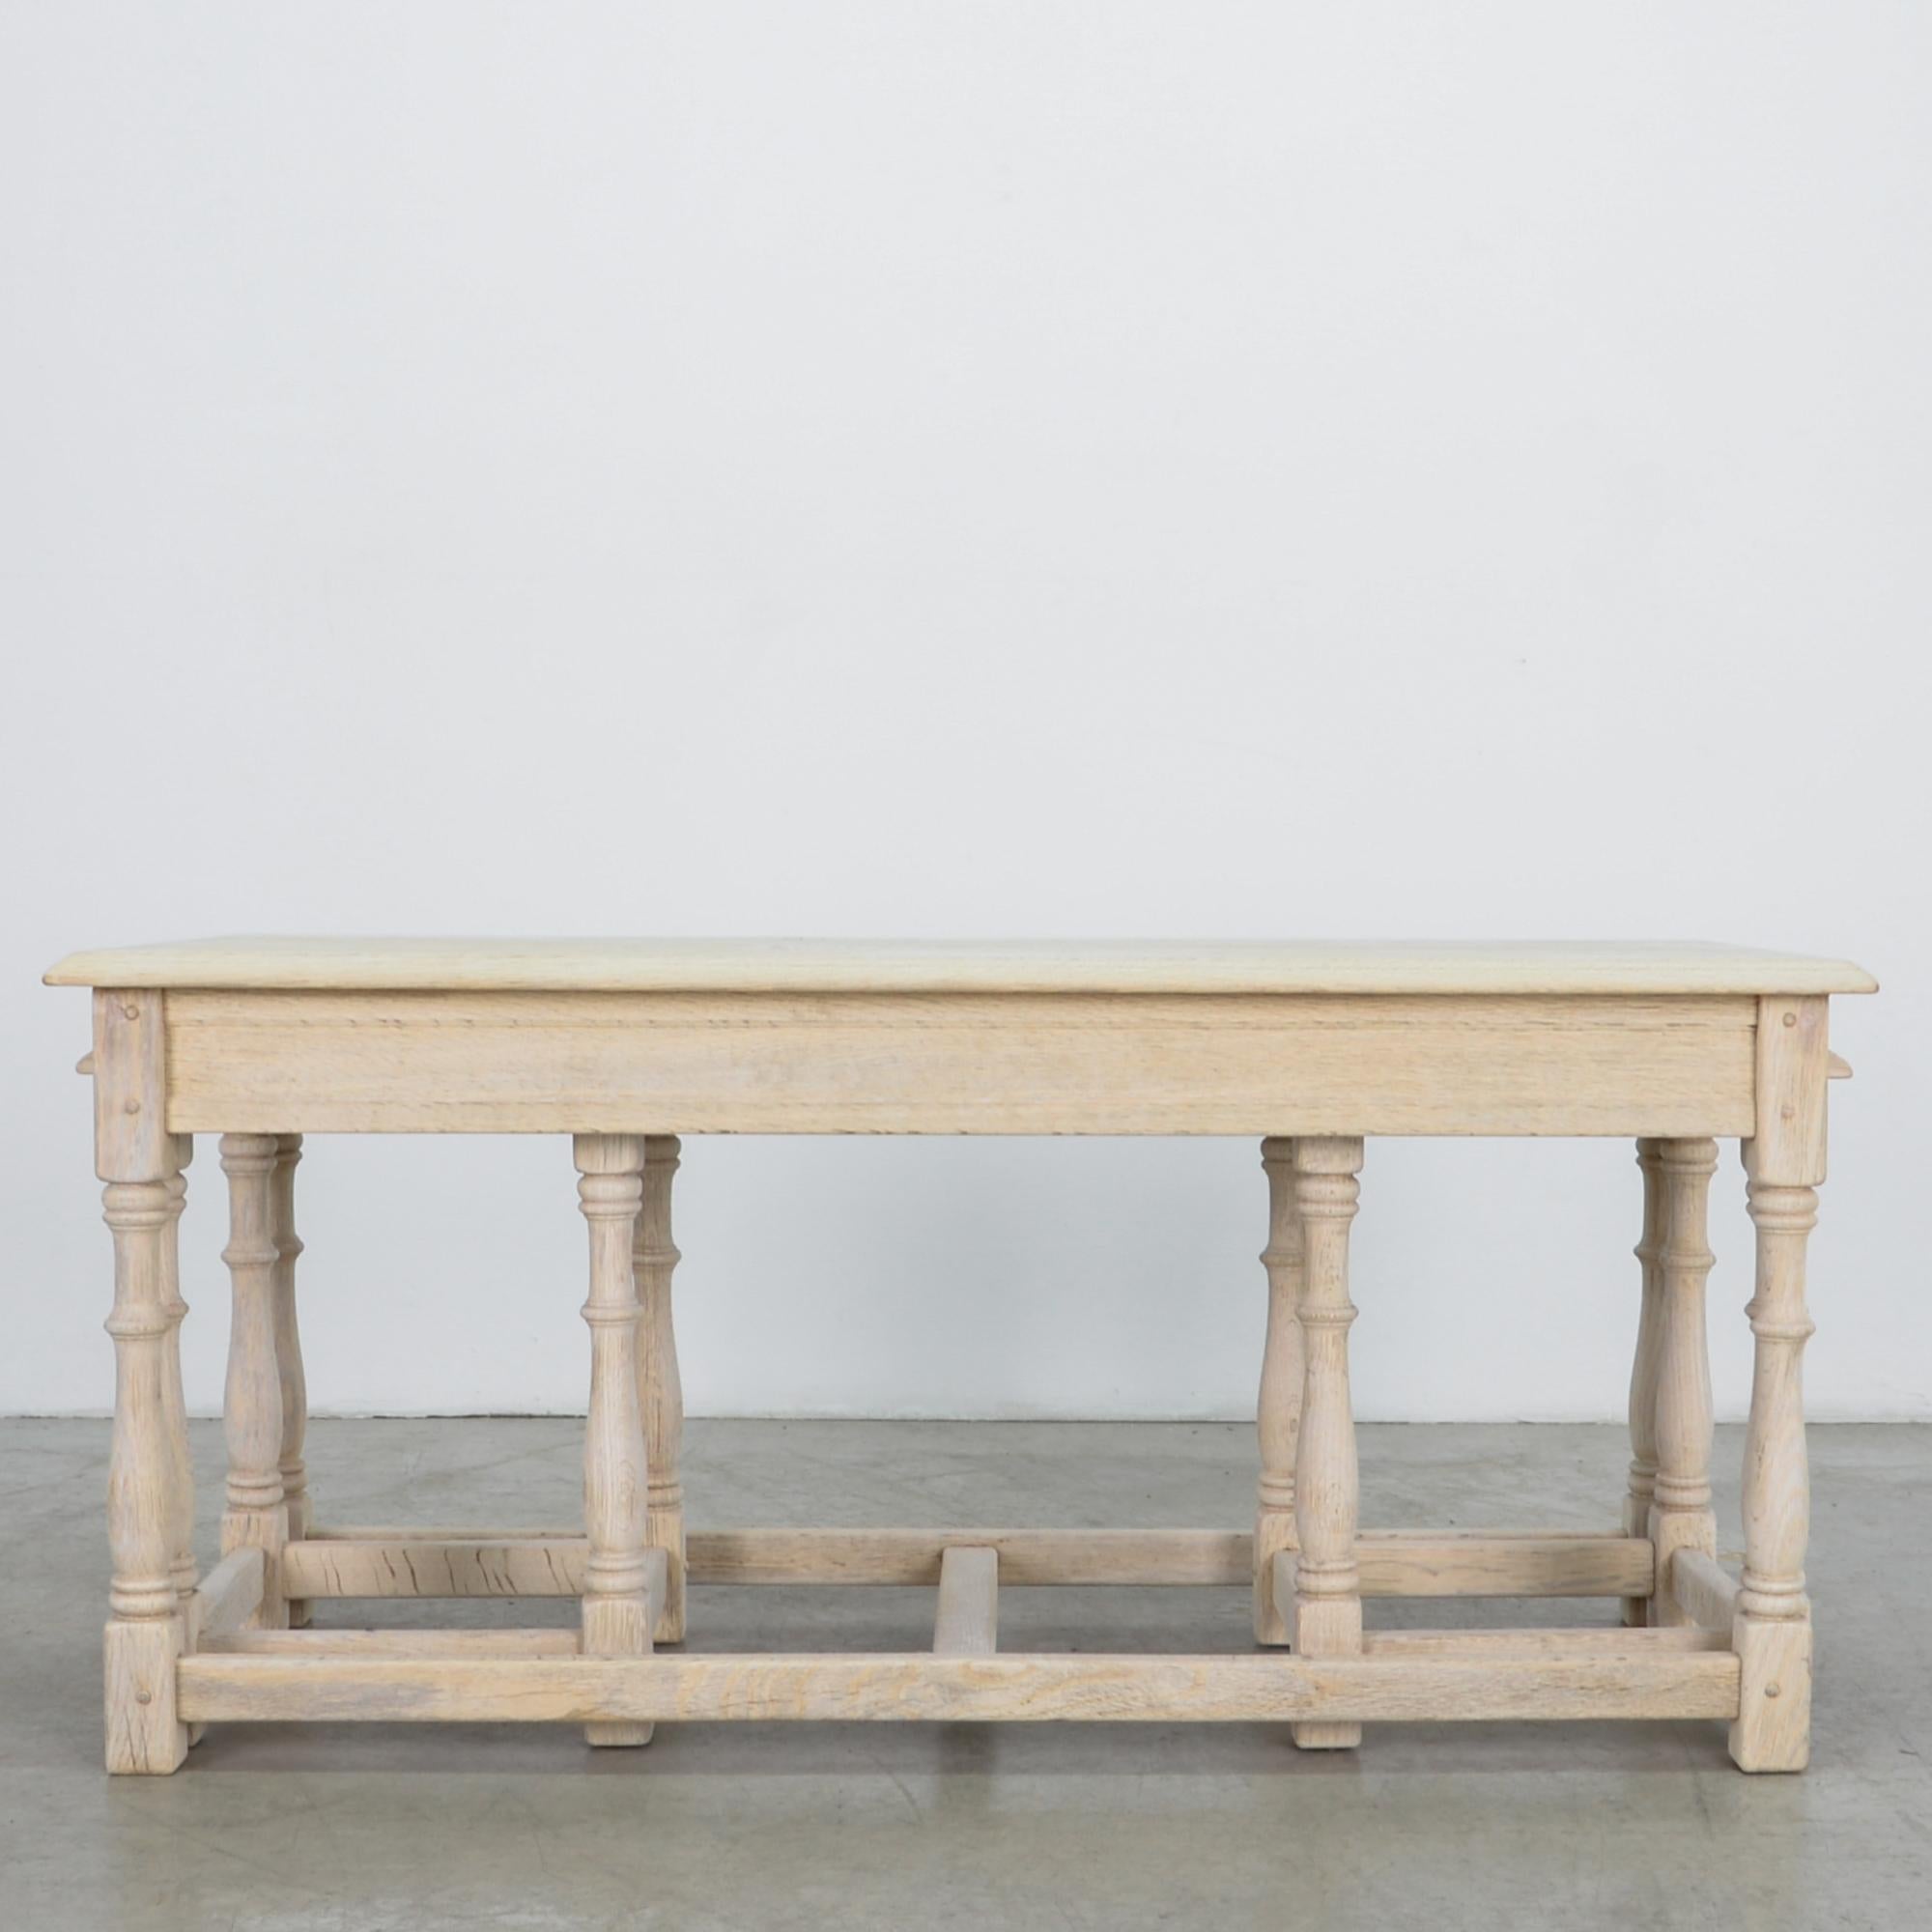 A sturdy long table in oak, from 1960s Belgium. With unique nesting configuration, two small square tables can be stowed from either end. Sturdy construction and subtle ornament follows the lineage of European craftsmen, with wood turn legs and